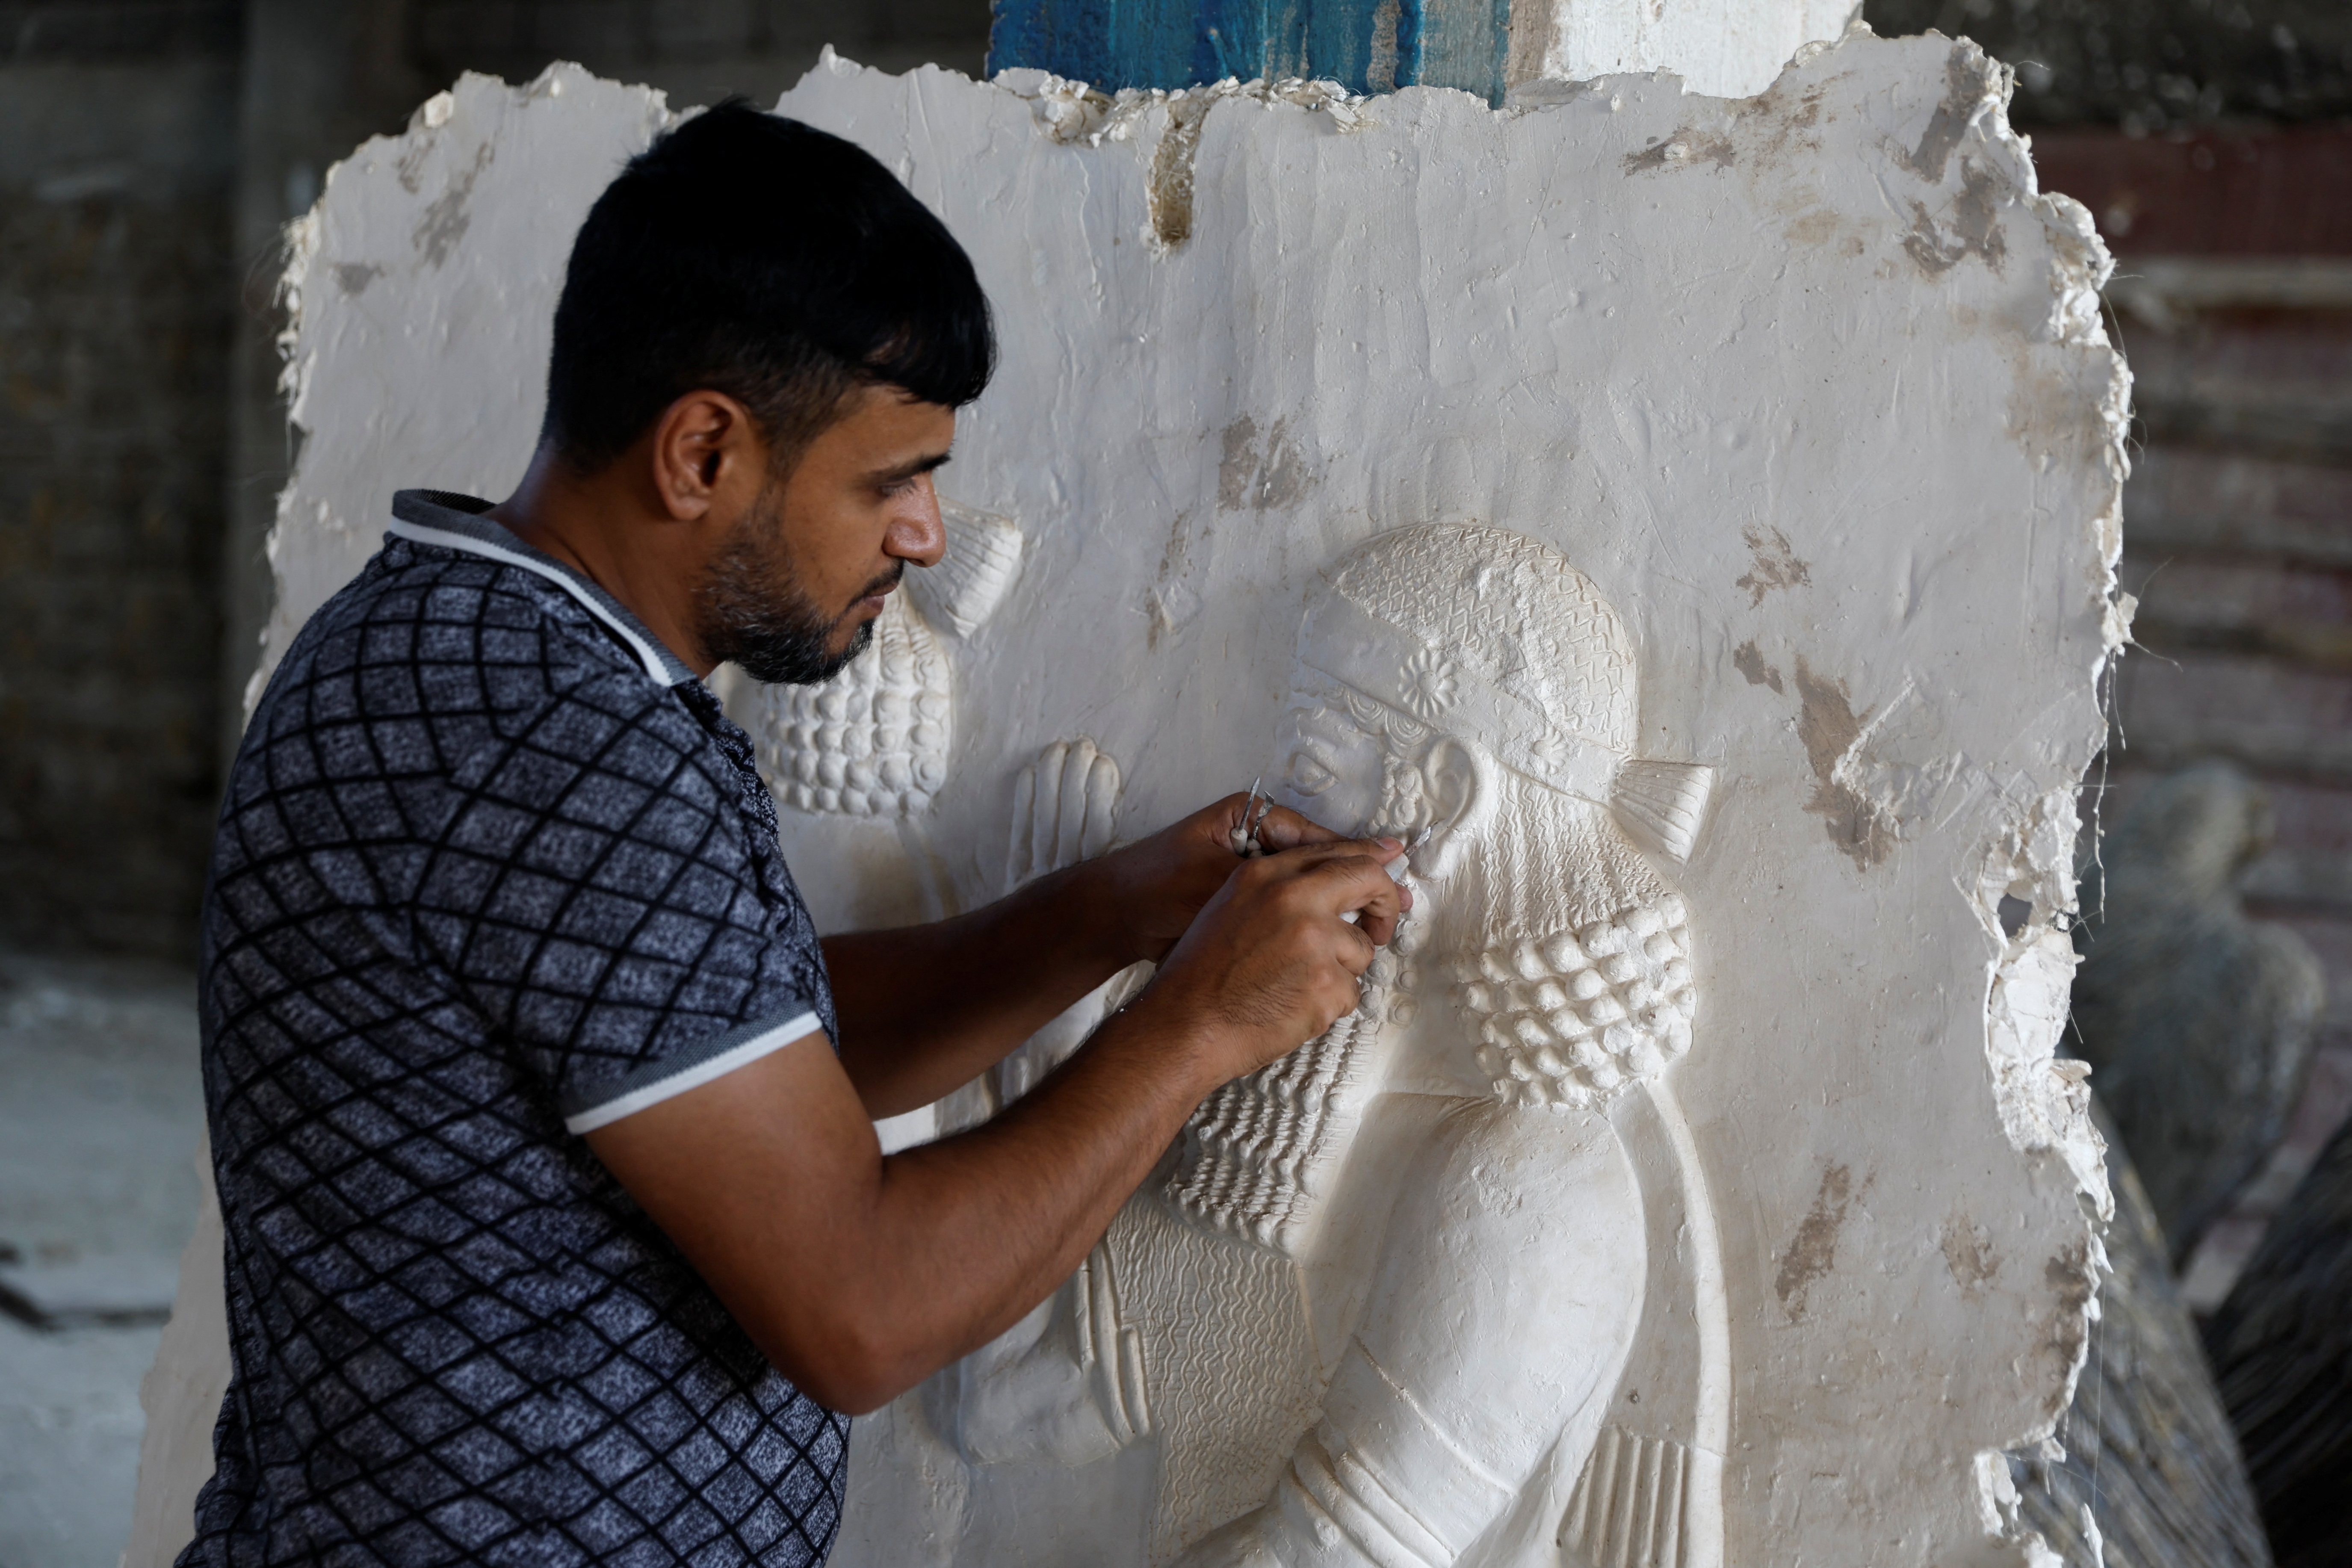 The sculptor Khaled al-Abadi works inside his workshop on his sculptures which depict scenes from the history of the city of Mosul, in Mosul